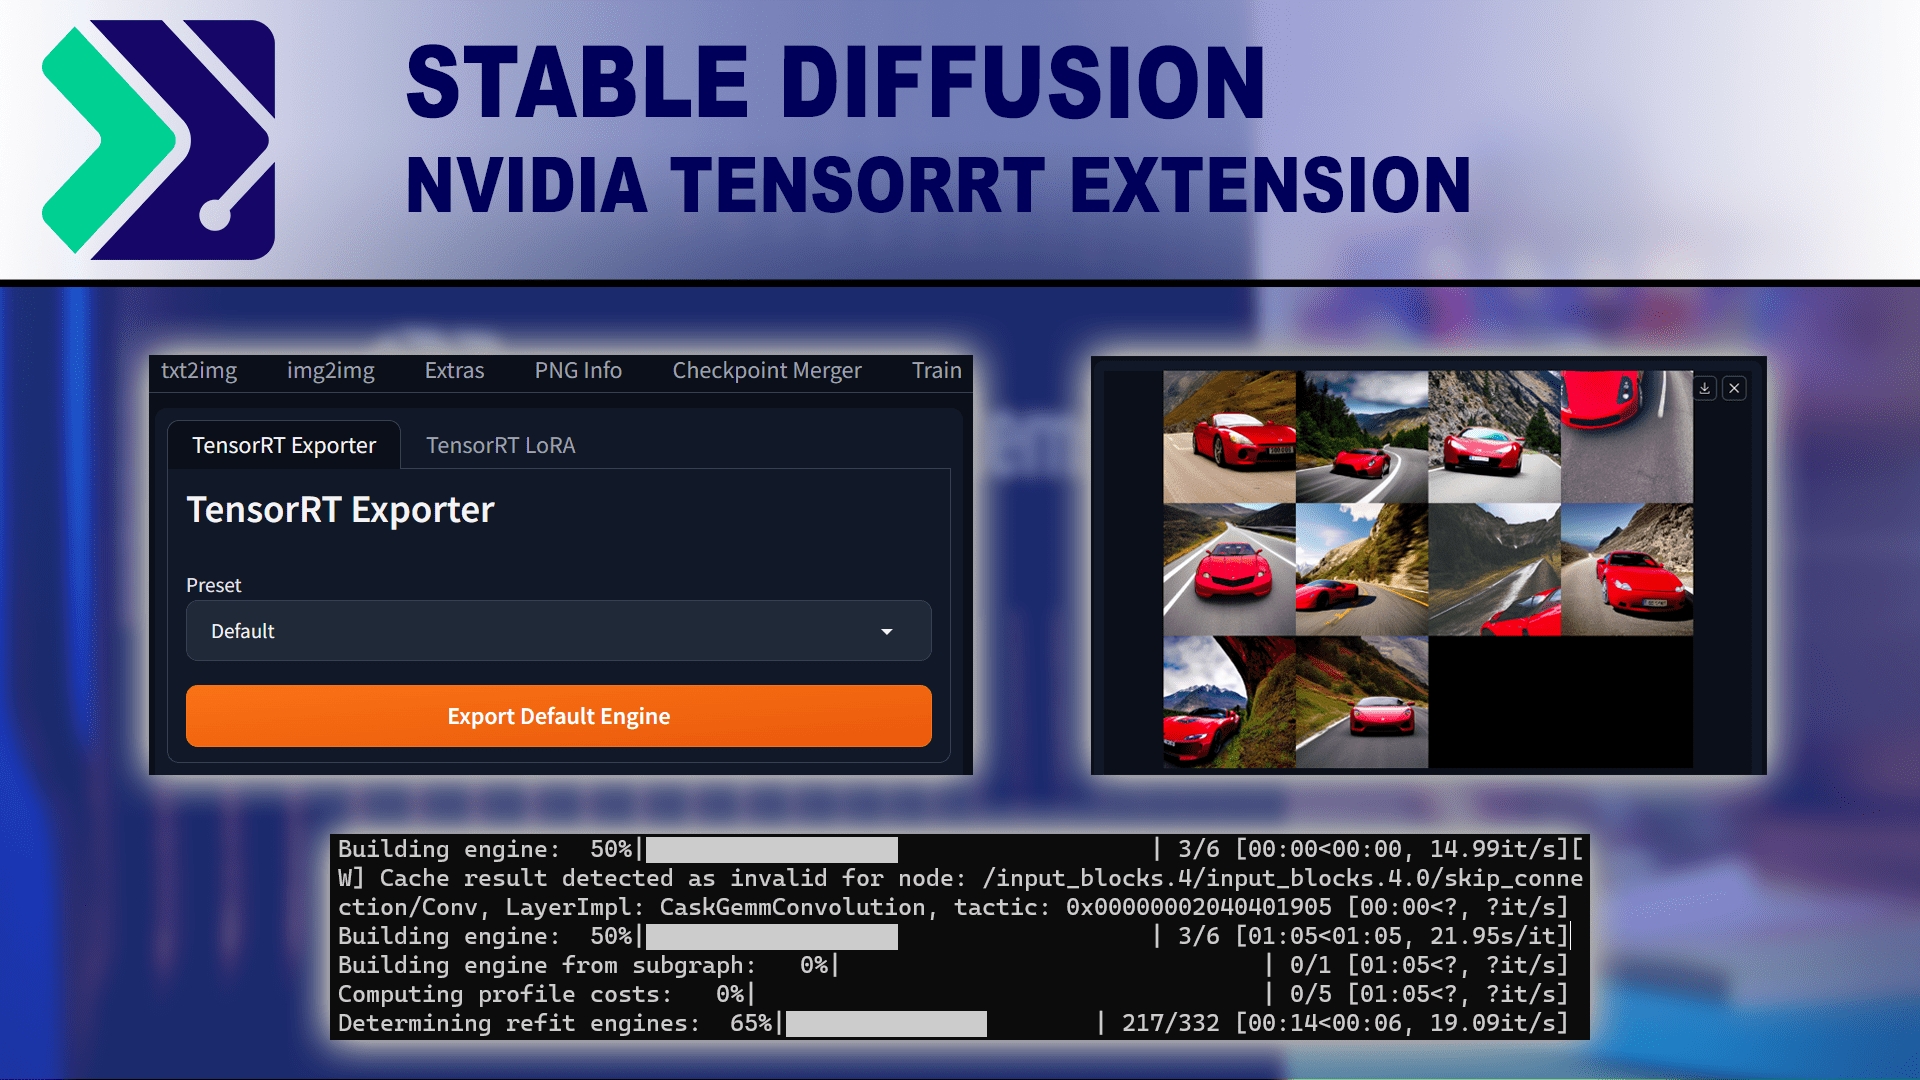 Featured image showing NVIDIA TensorRT Extension for Stable Diffusion Automatic 1111